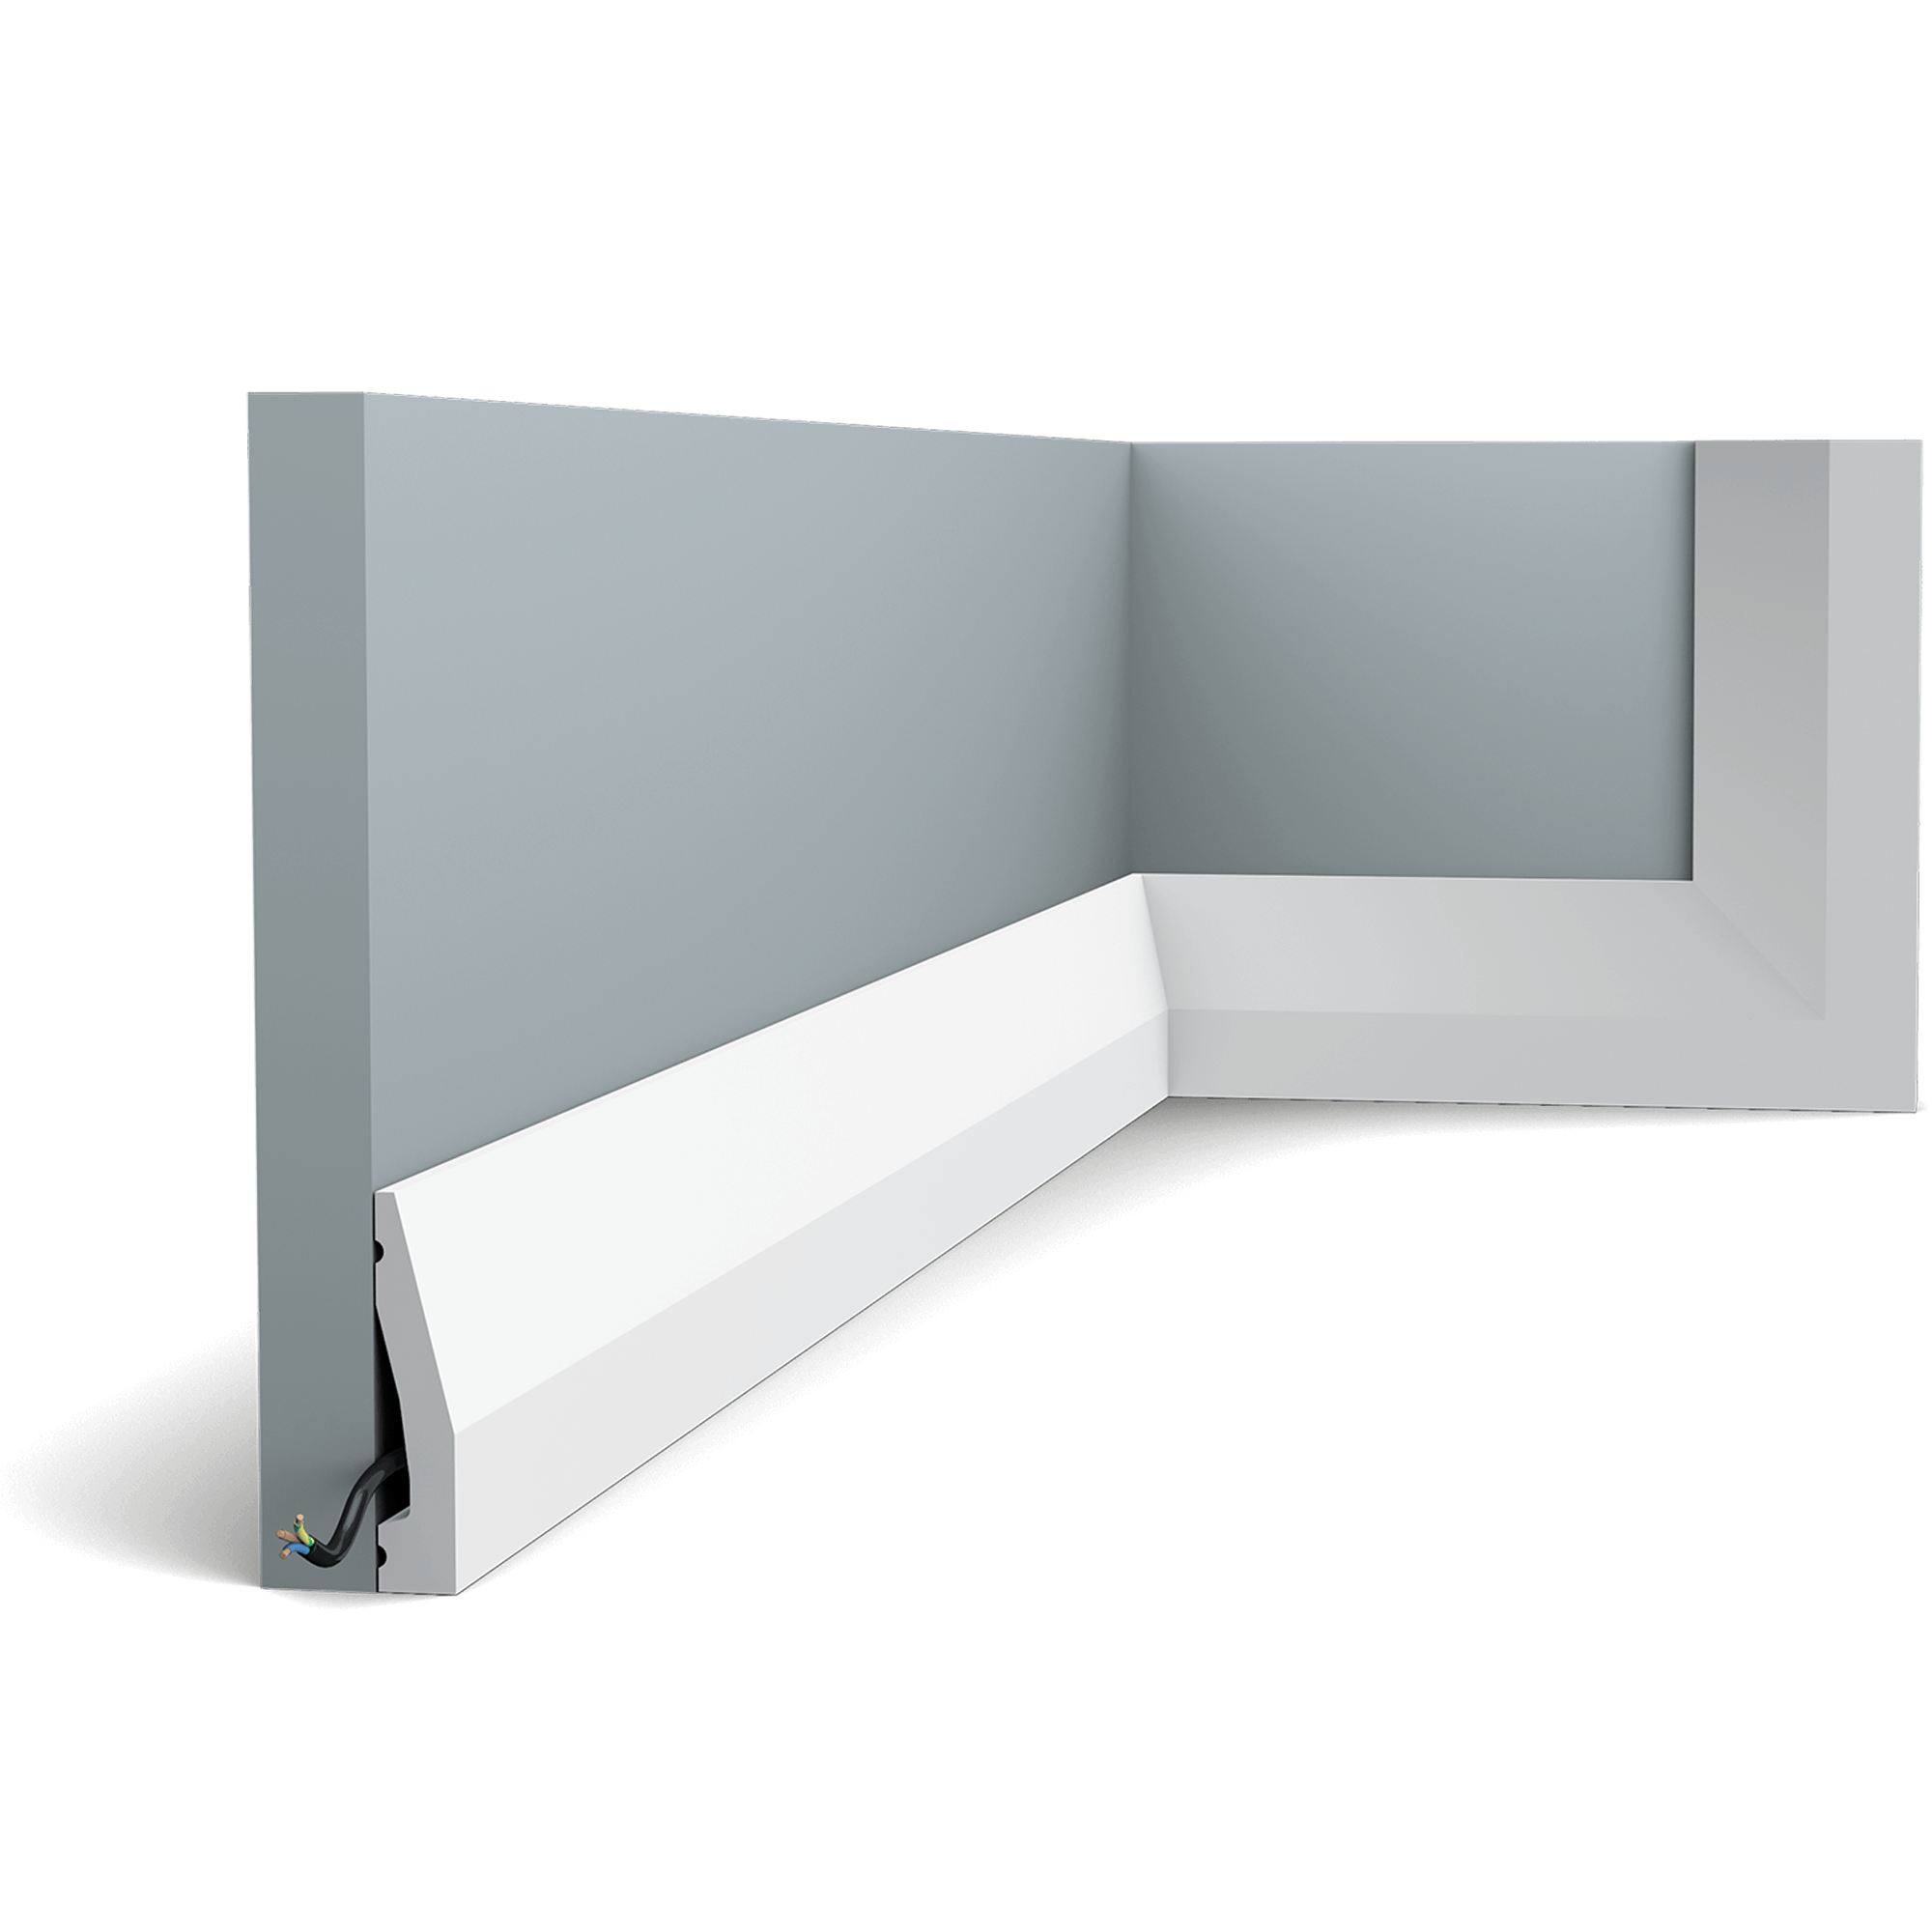 This simple skirting board has a slight angle and fits any interior. This multifunctional moulding creates a seamless transition betweens walls and doors, windows and even ceilings.